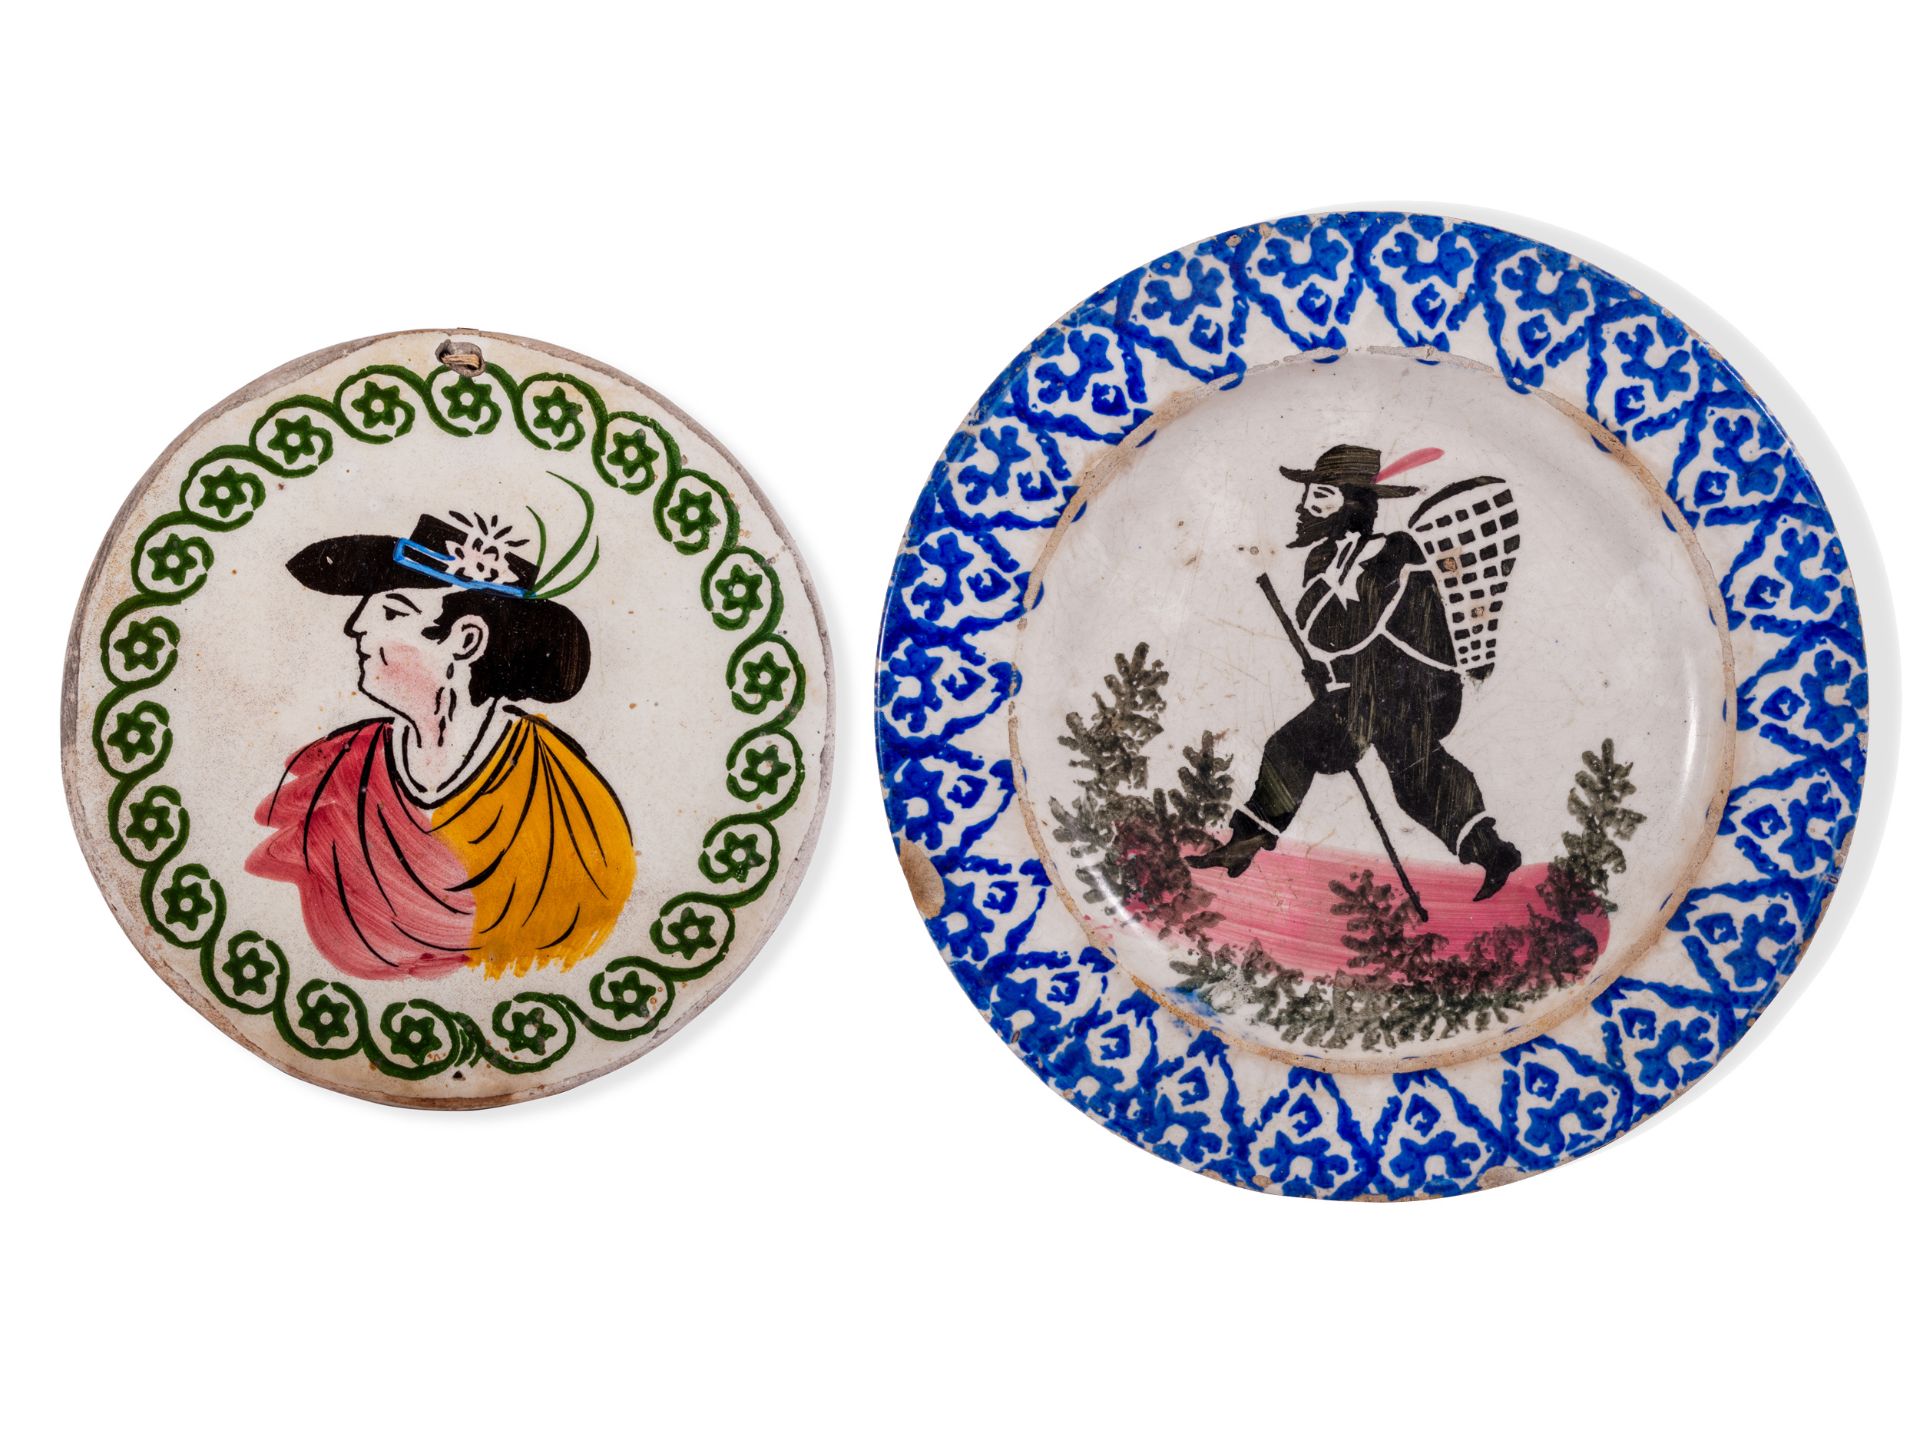 Pair of plates with wanderer man and profile portrait, Italy/Venice, 18./19. Century